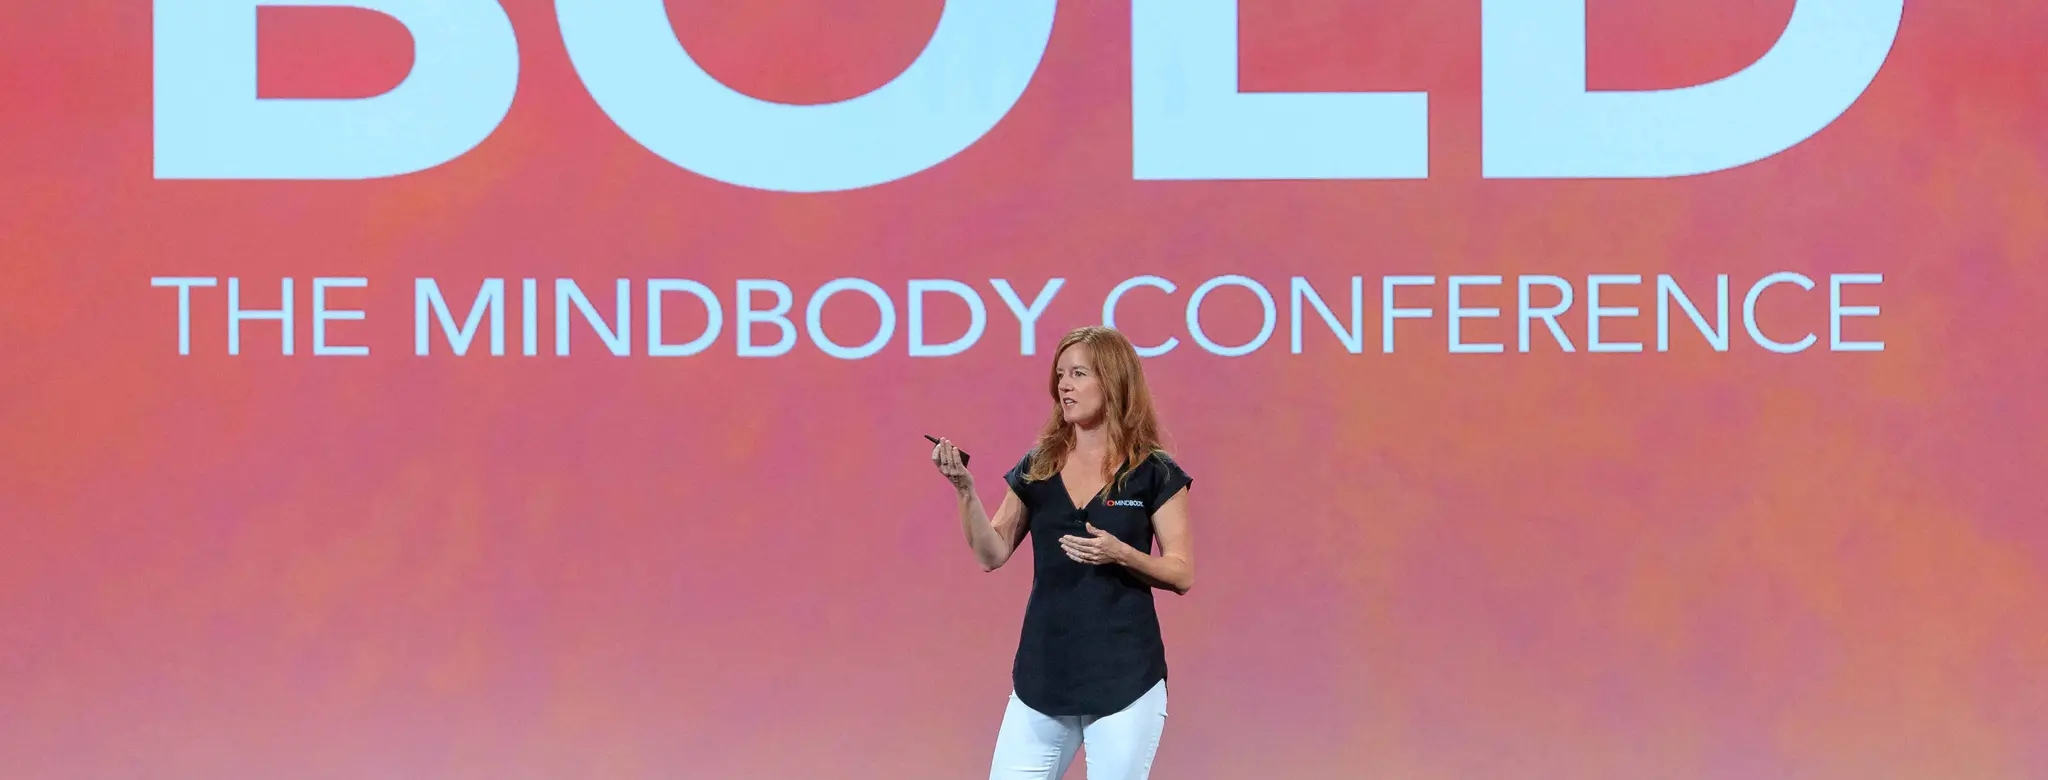 Presenter discussing wellness industry trends at BOLD